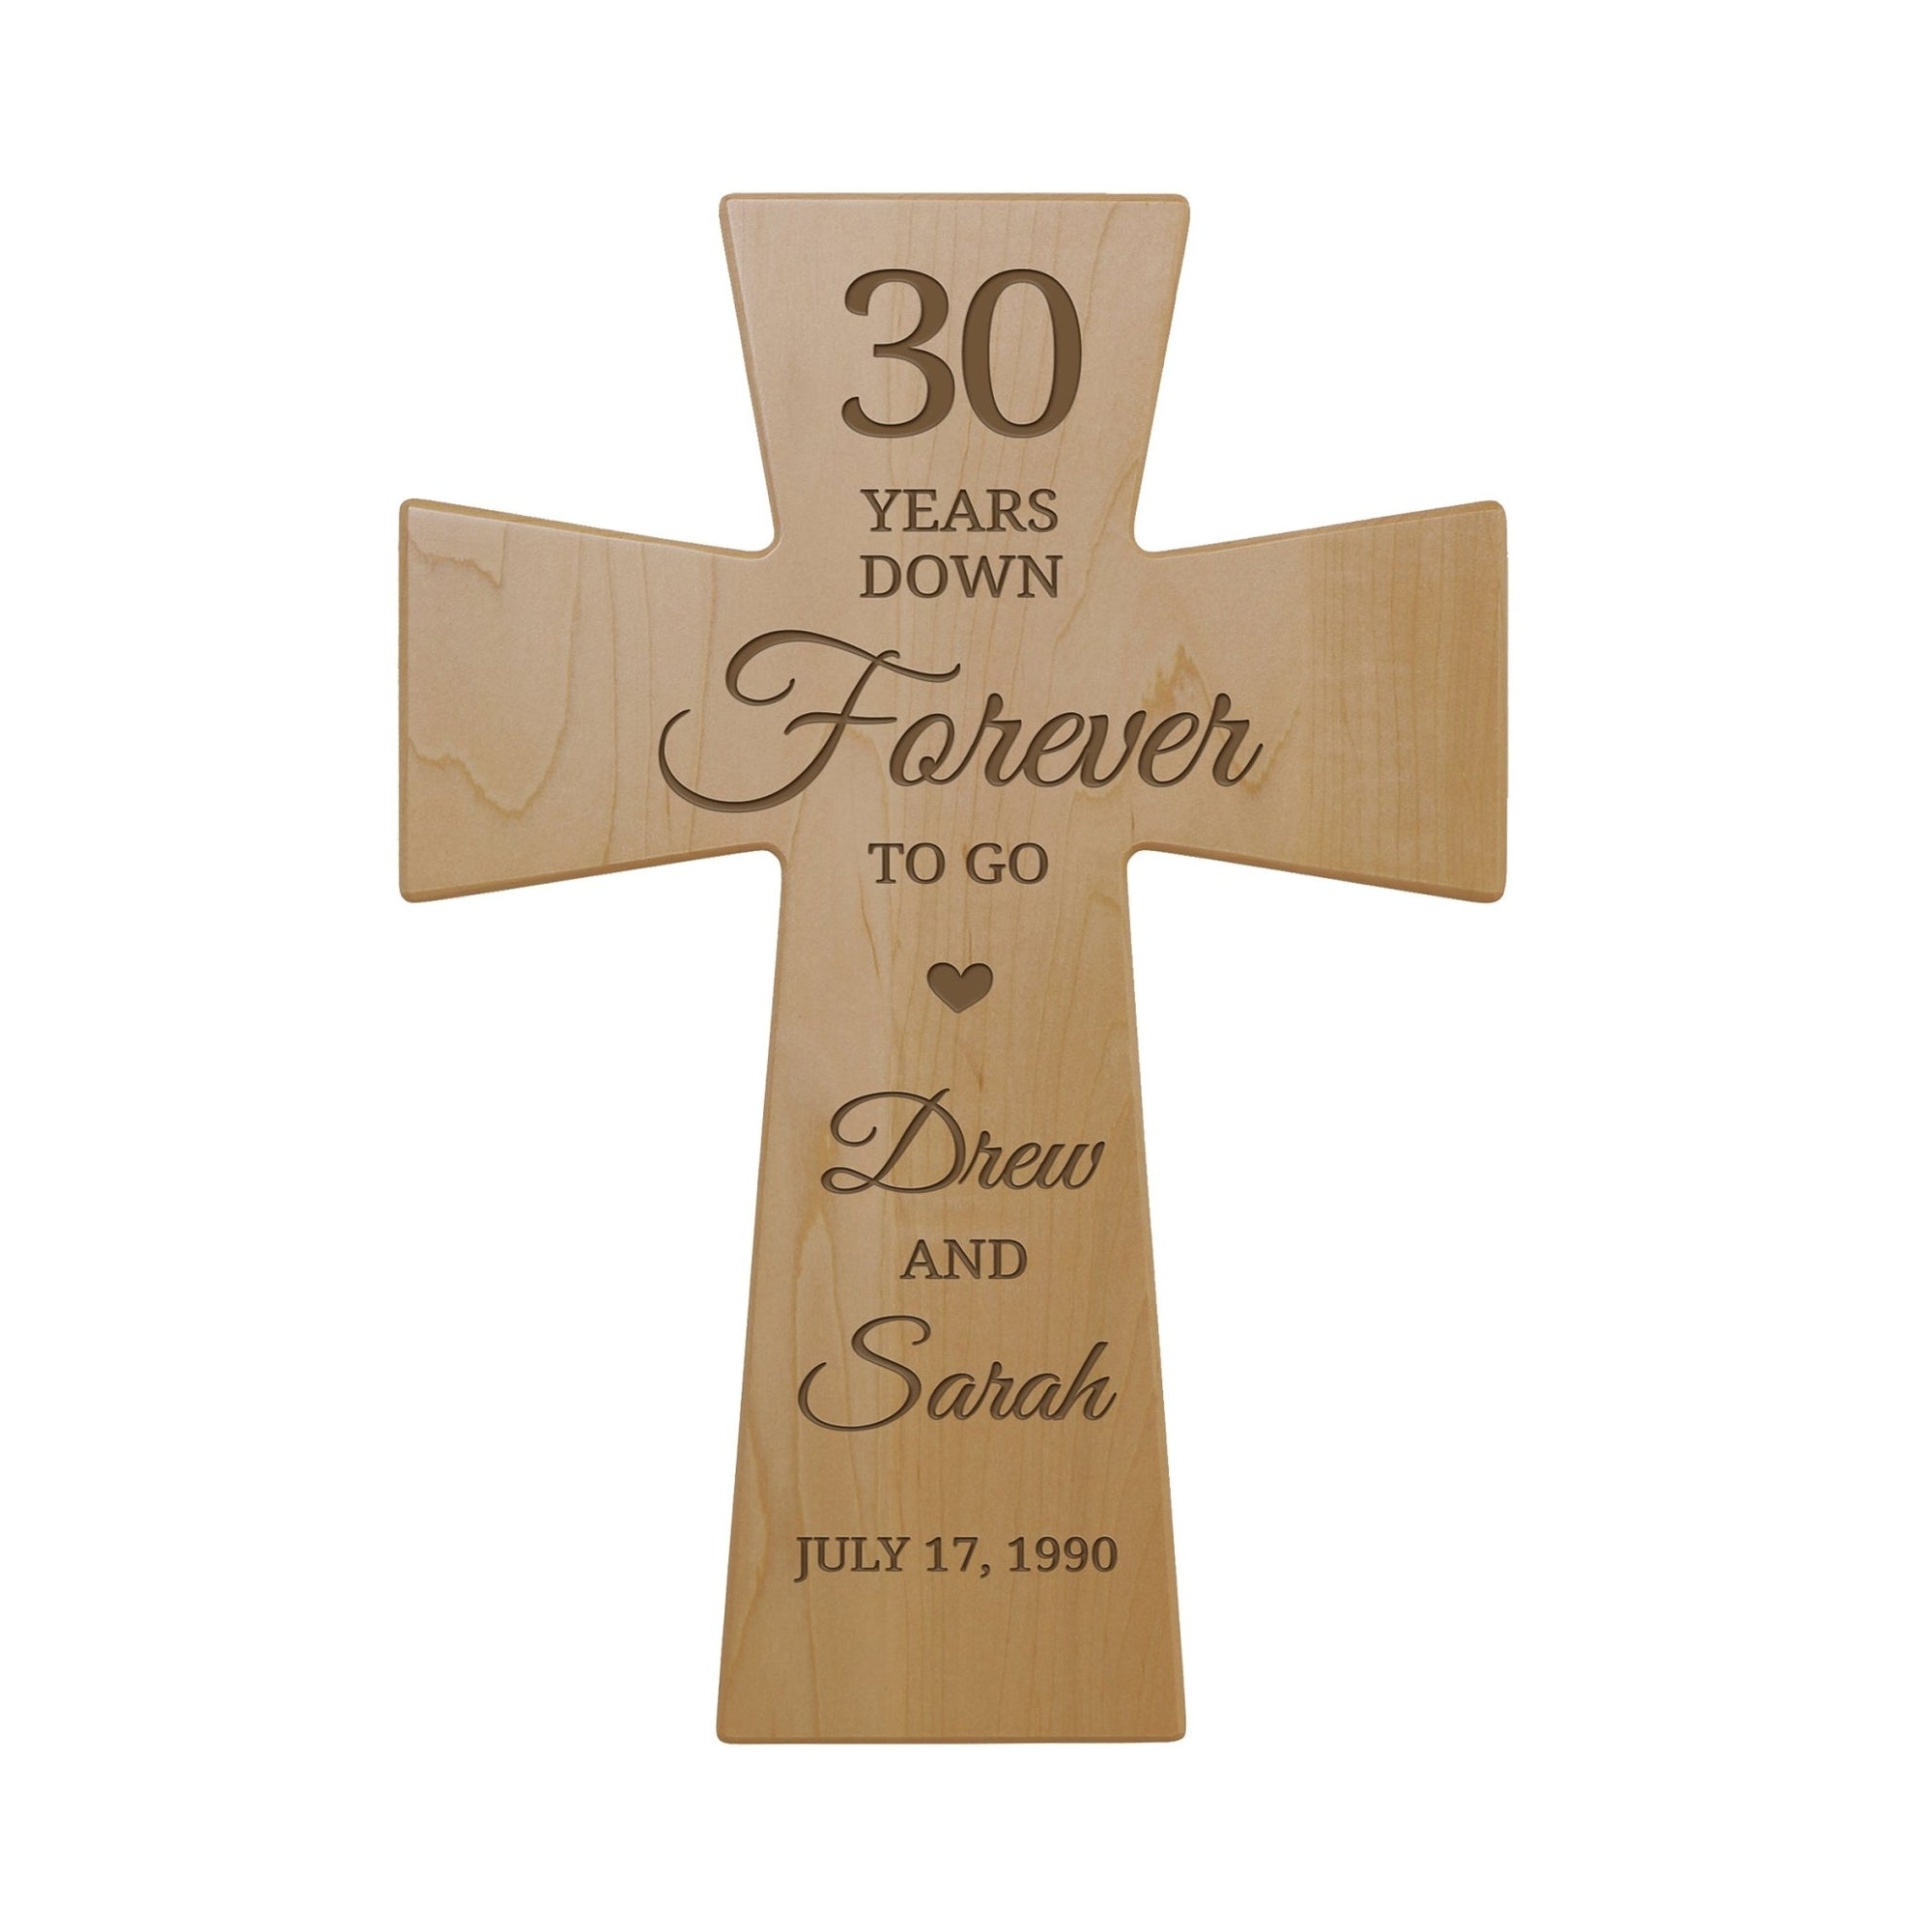 Lifesong Milestones Personalized 30th wedding wall cross – A symbol of enduring love and a perfect anniversary gift for the couple.